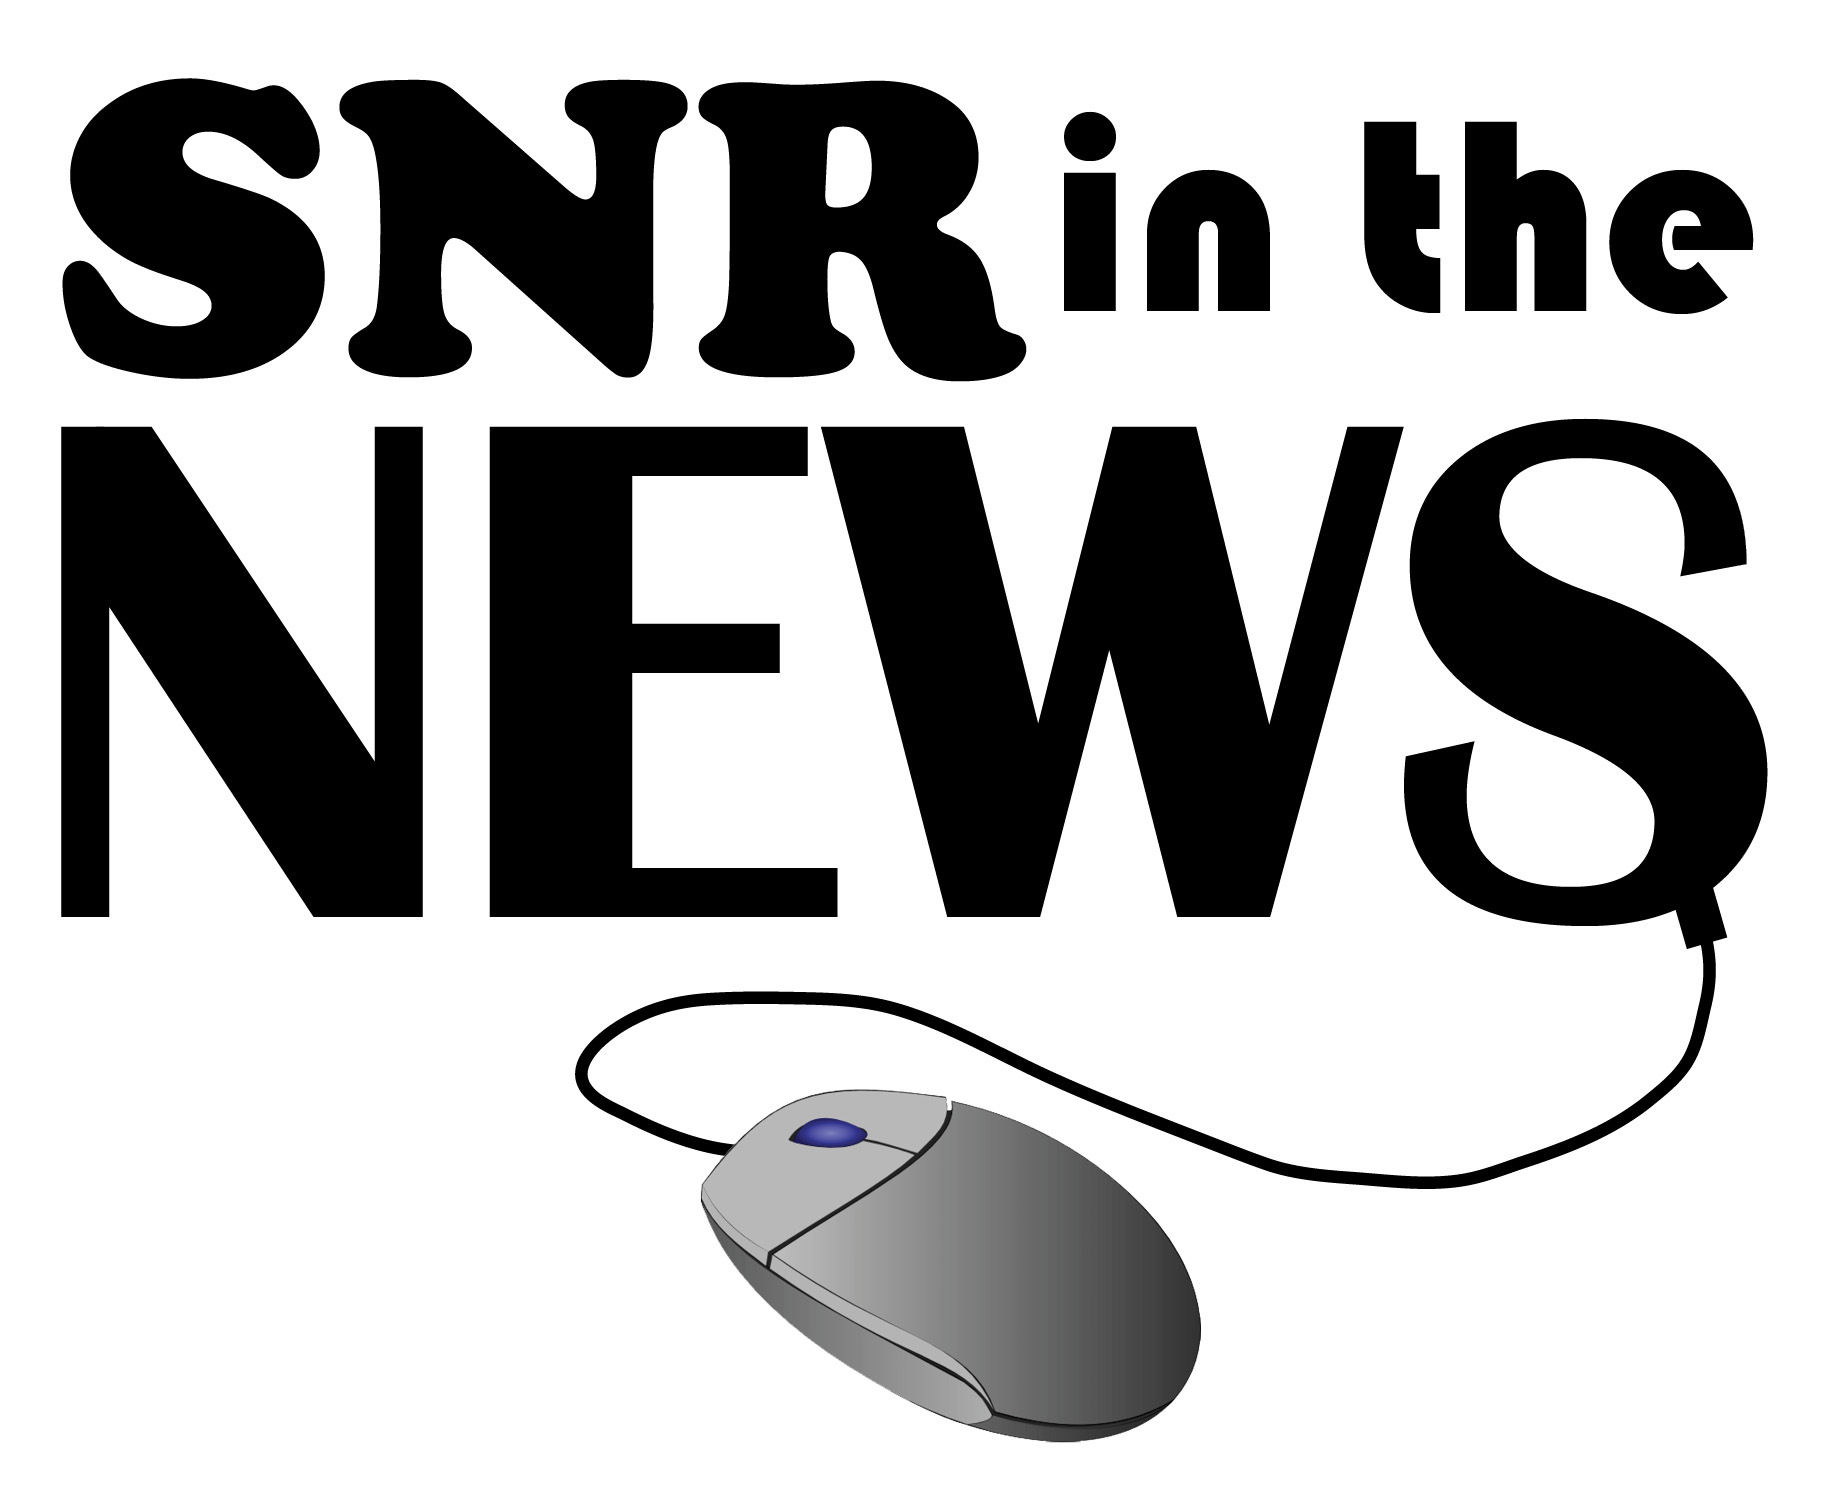 : SNR was featured in several news stories during the month of April.